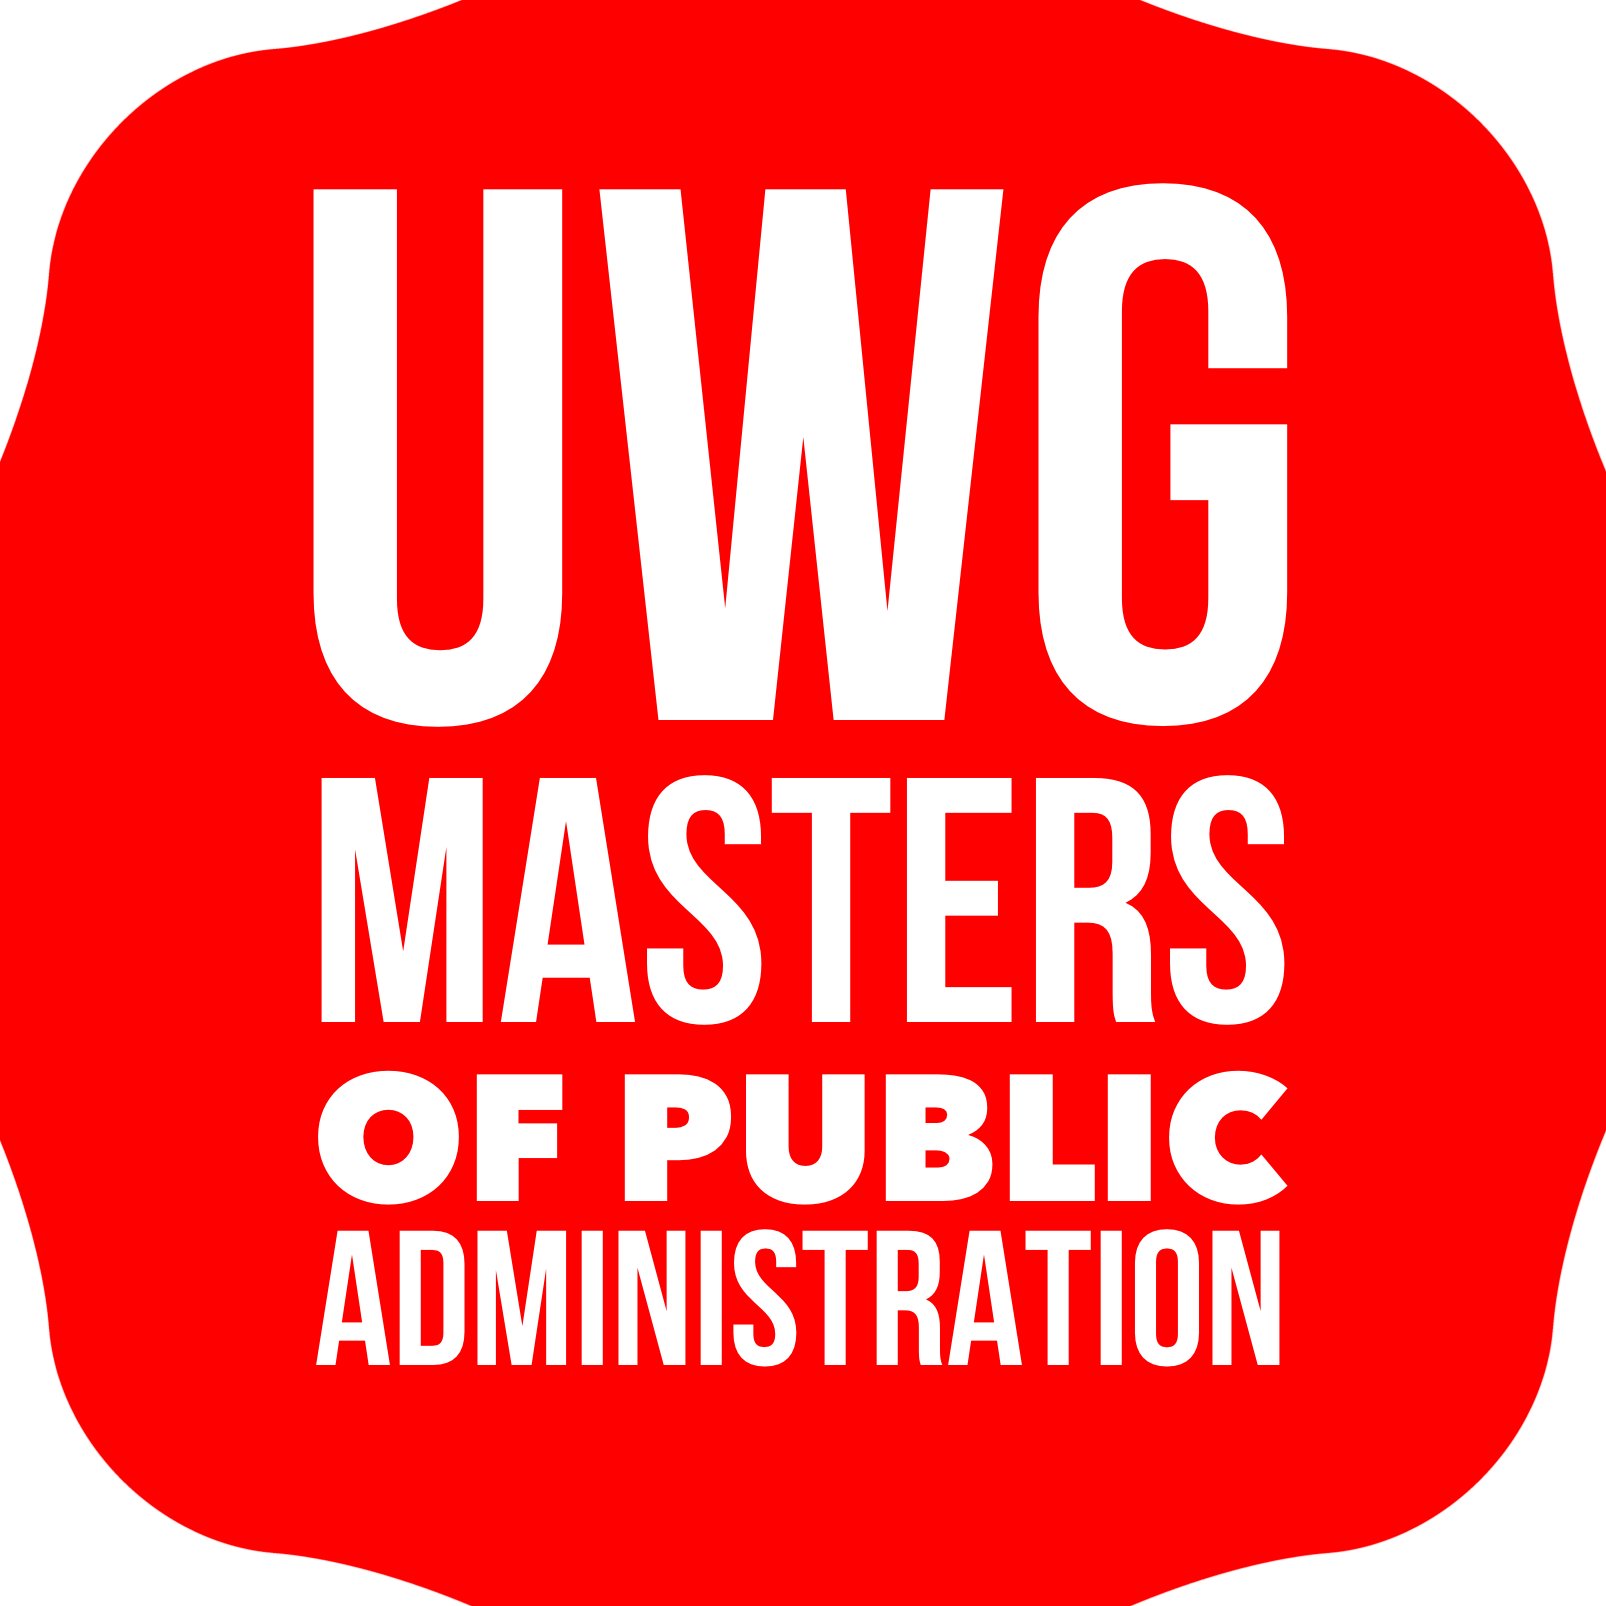 Official page for the Master of Public Administration Program. Follow us for news! Go West #uwg Instagram: @uwg.mpa